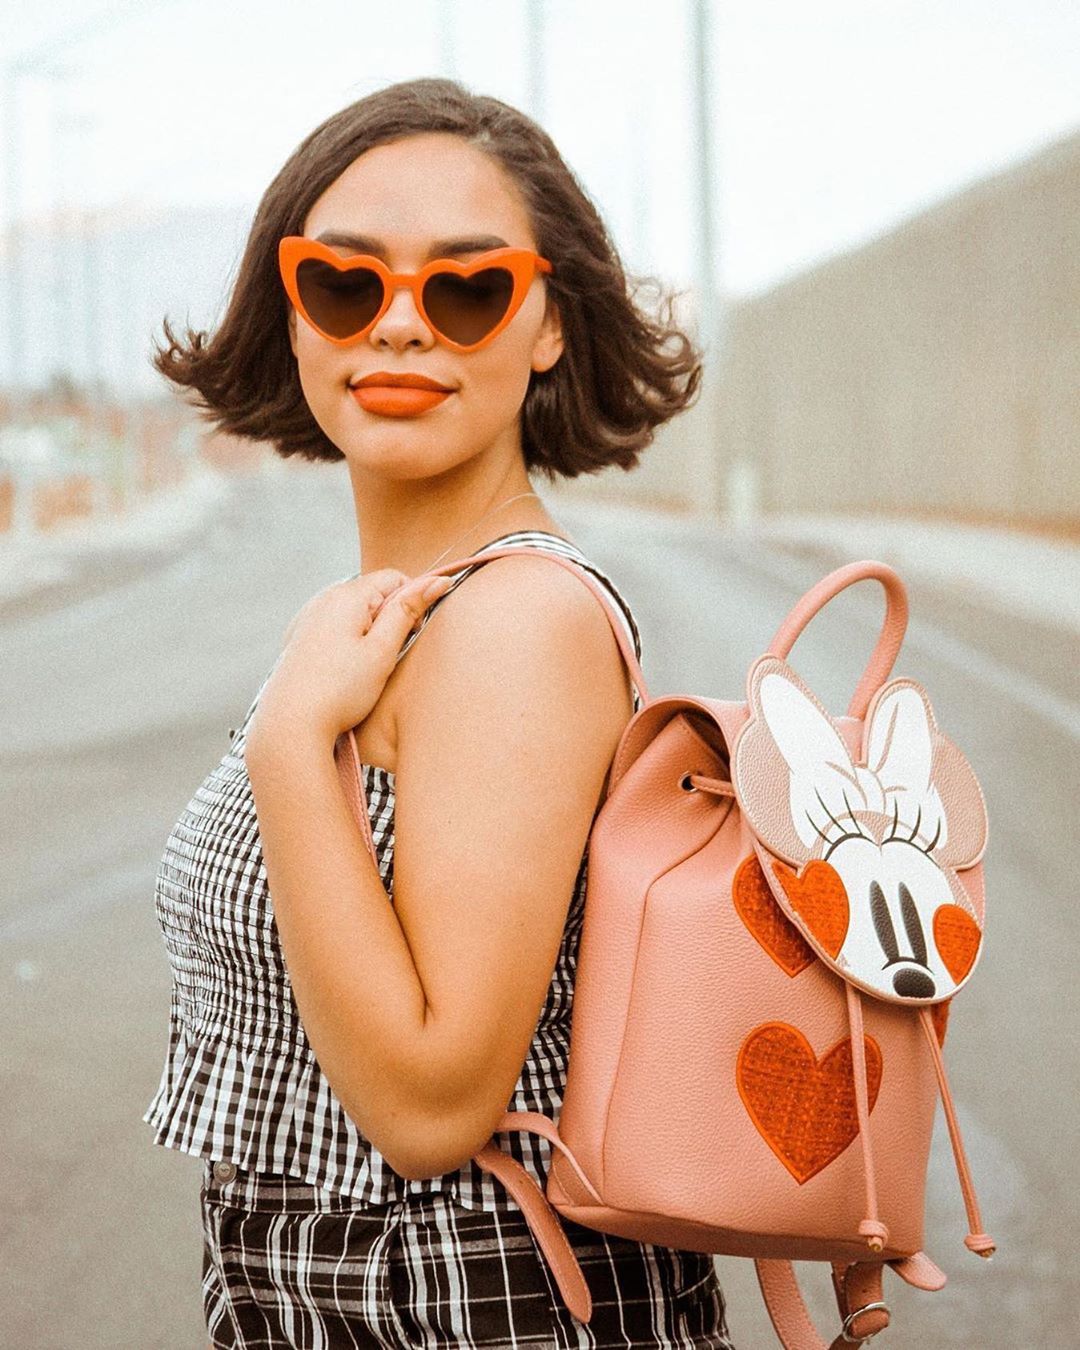 Minnie Style - We’ve got major 😍 for @itssimplysky’s #MinnieStyle look & her @dnhandbags backpack 💖